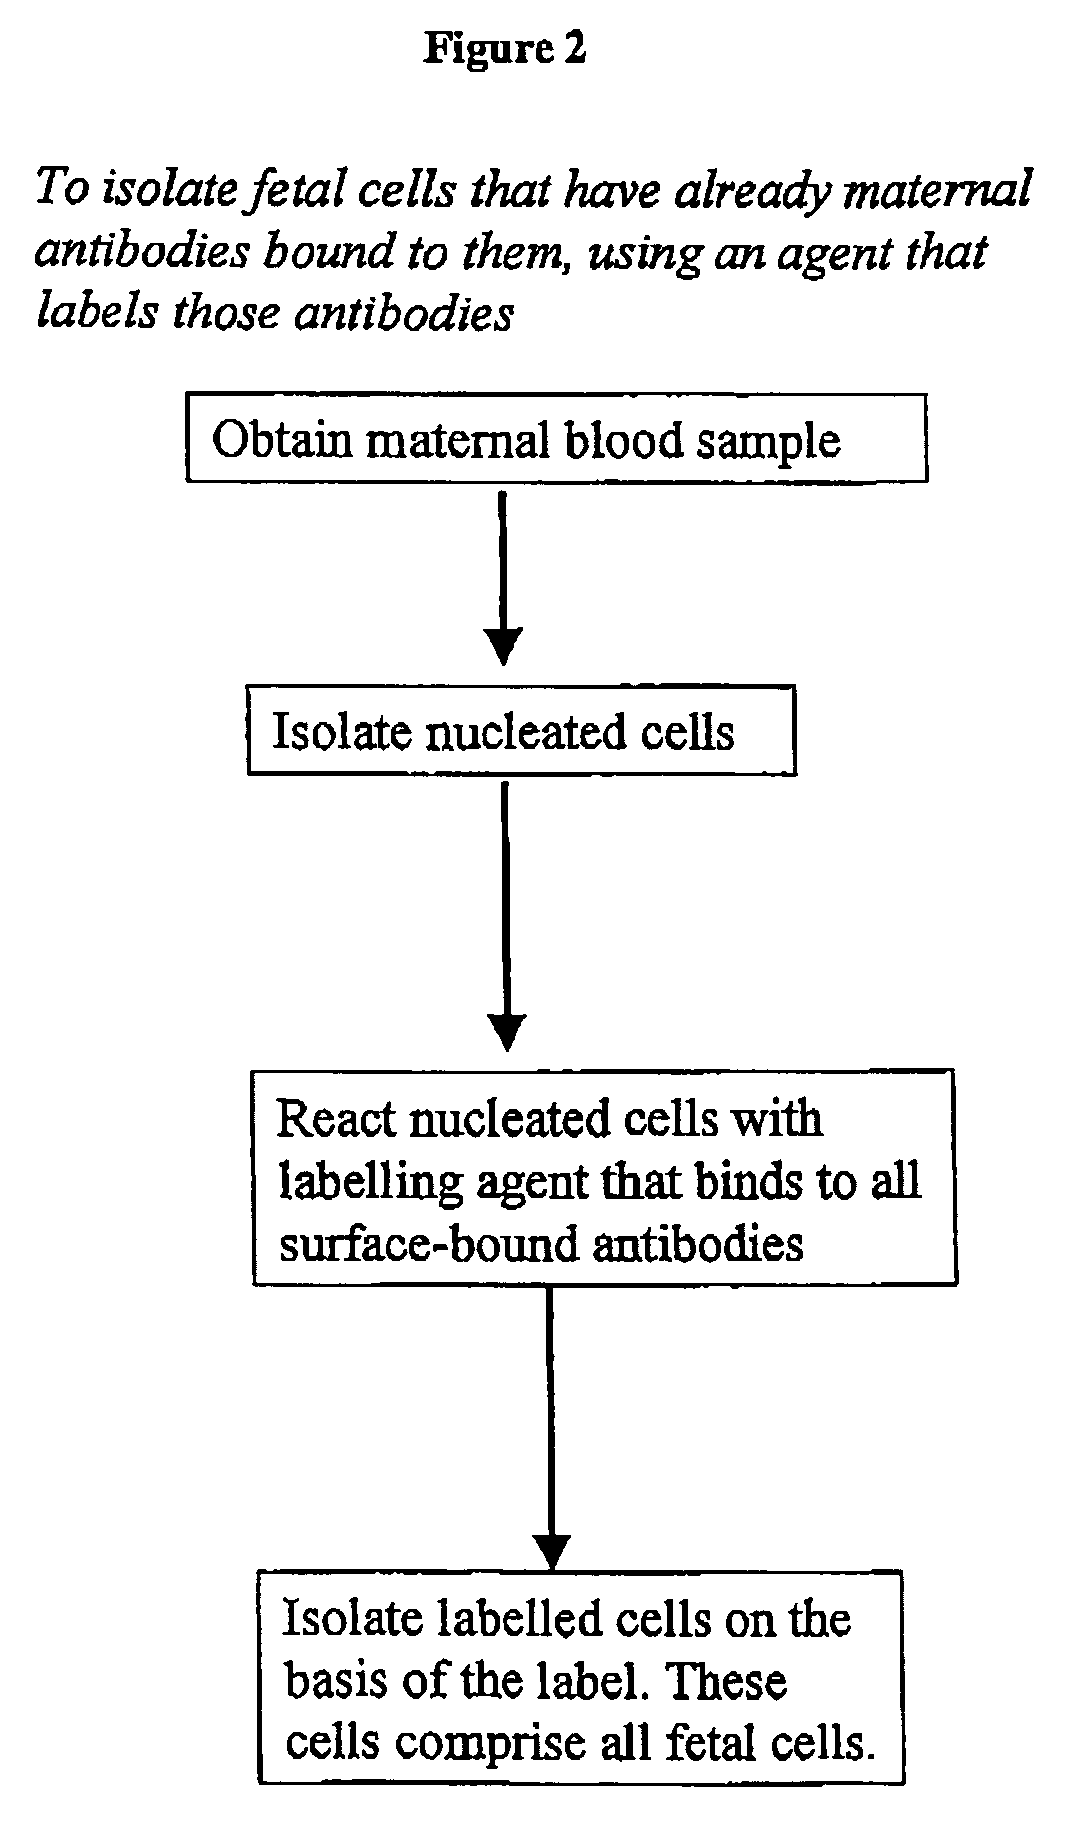 Maternal antibodies as fetal cell markers to identify and enrich fetal cells from maternal blood